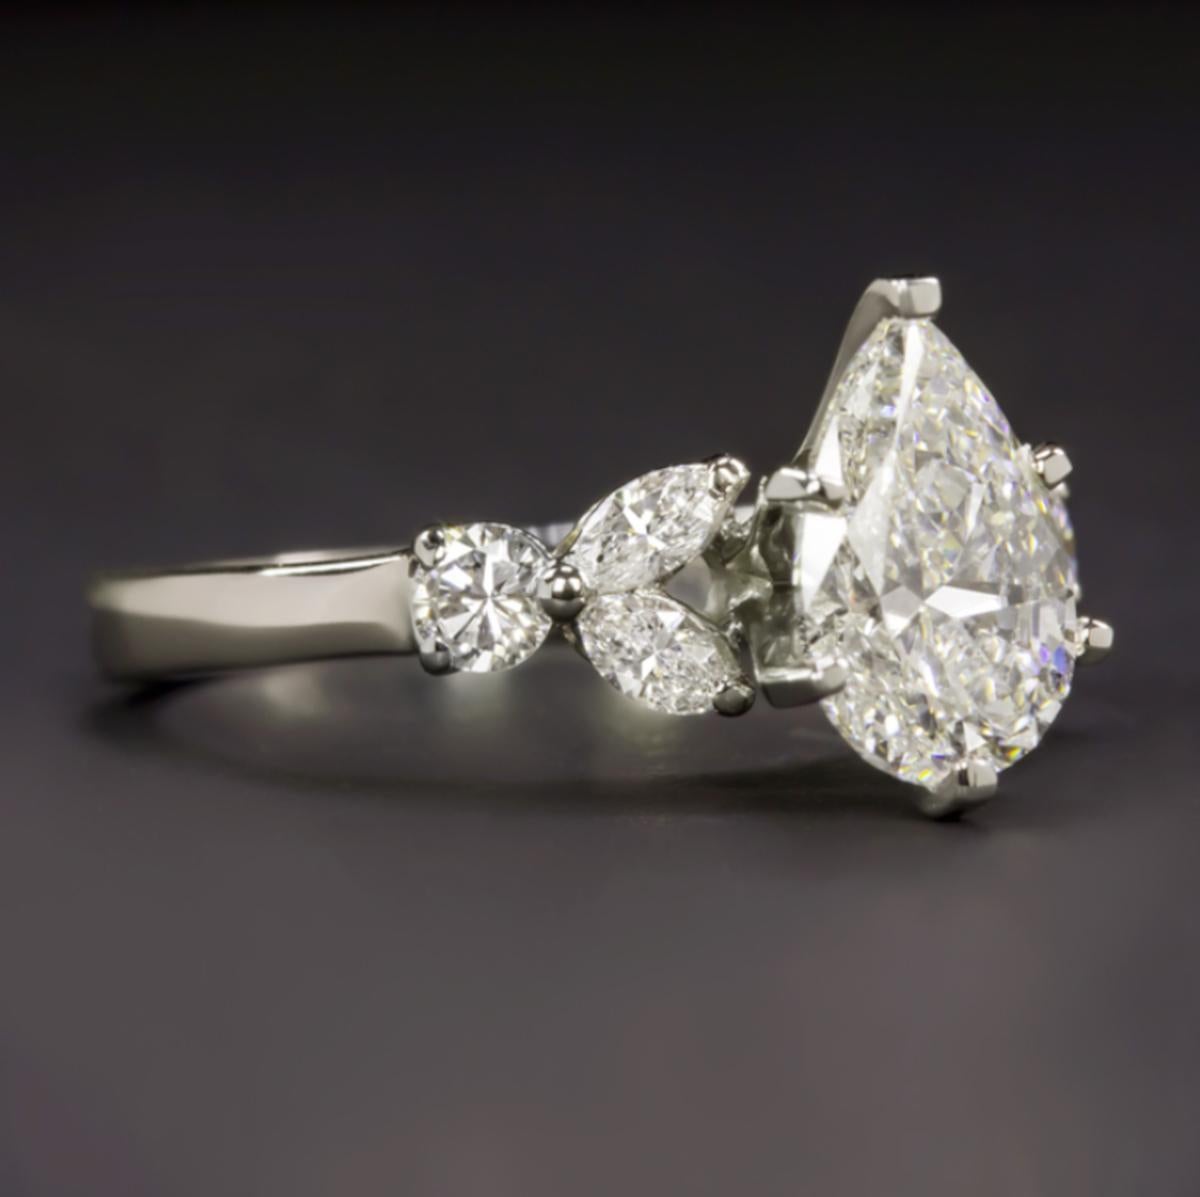 Ring with a 1.53 carat GIA certified pear cut main diamond.
The main stone is G in color and SI2 in clarity; it is a beautiful stone with no fluorescence.
The side stones are two round cut diamonds and four marquise cut diamonds; they are E-F  in